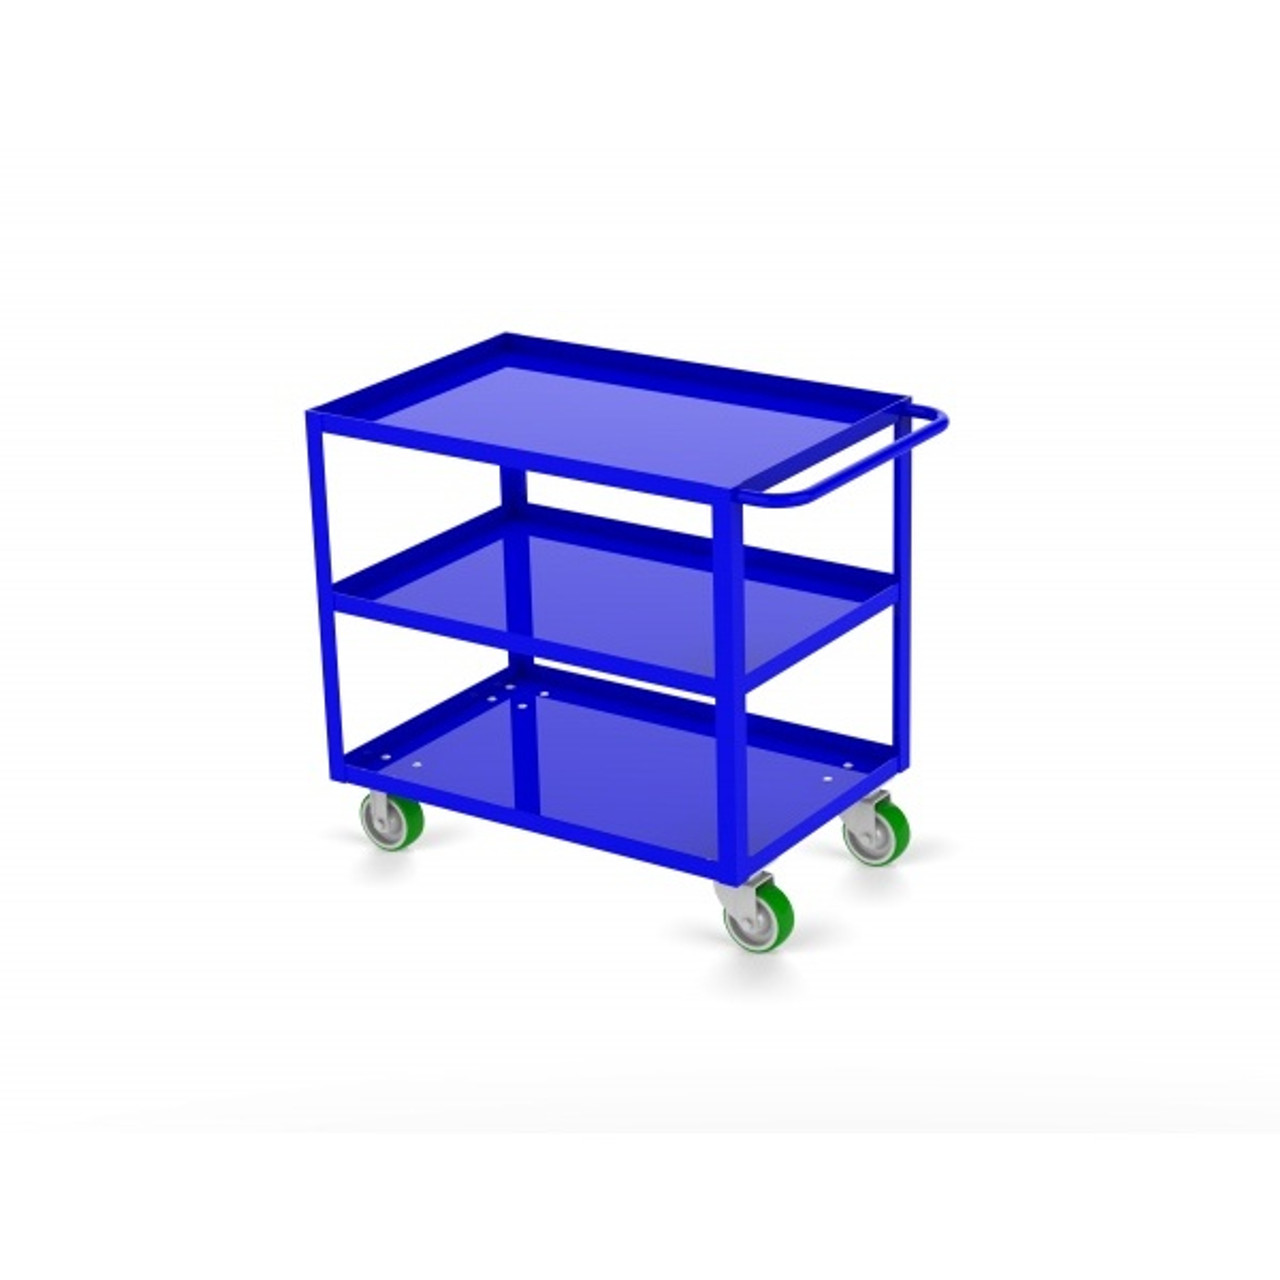 Valley Craft Three Shelf 24 x 36" Utility Cart, Blue with Poly Casters(CALL FOR BEST PRICING)